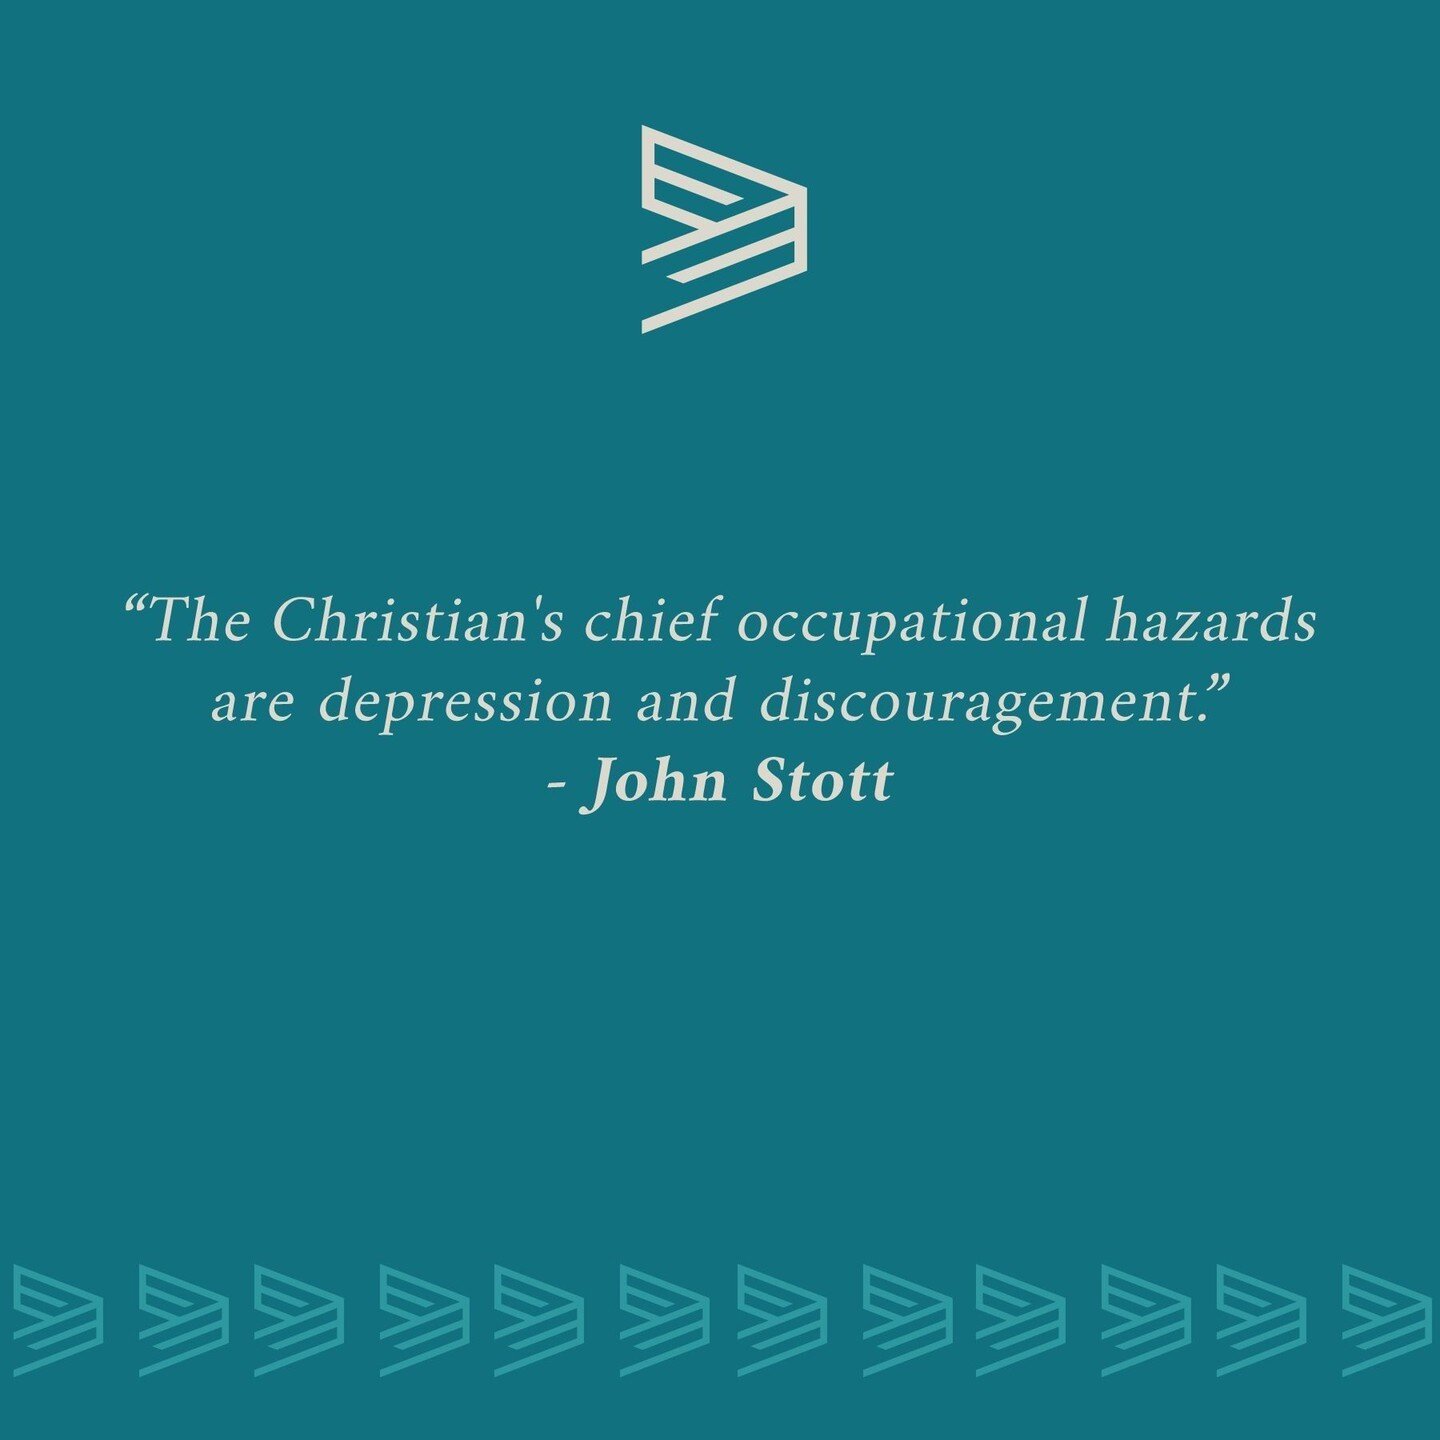 Quote from this week&rsquo;s EEleaders Podcast lesson on Discouragement -

https://eeleaders.com/the-podcast